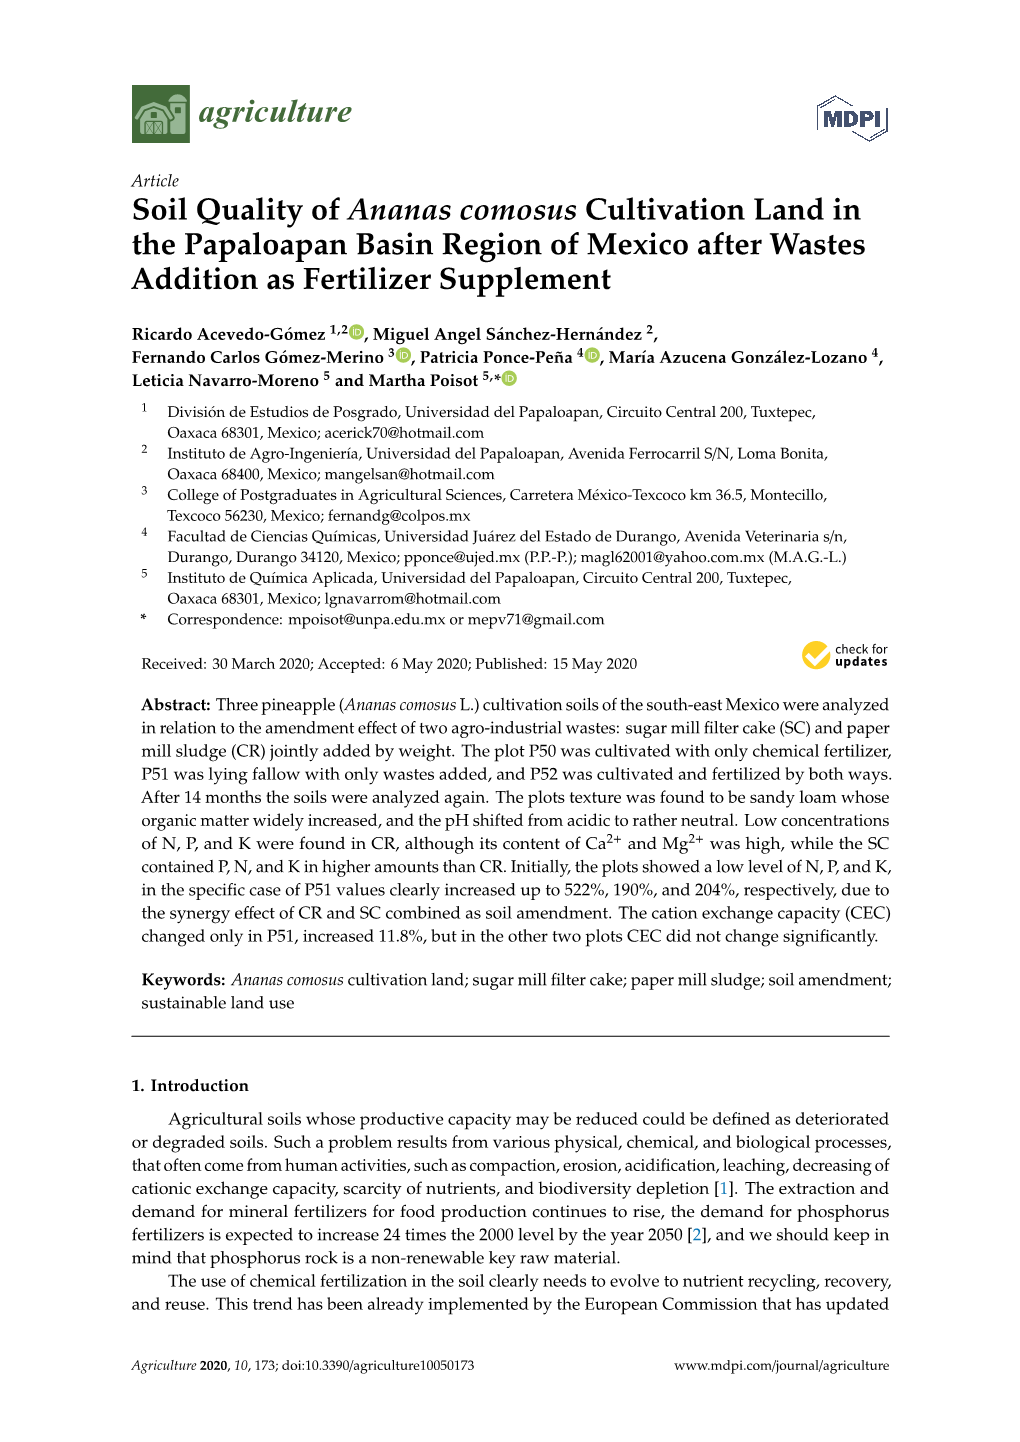 Soil Quality of Ananas Comosus Cultivation Land in the Papaloapan Basin Region of Mexico After Wastes Addition As Fertilizer Supplement